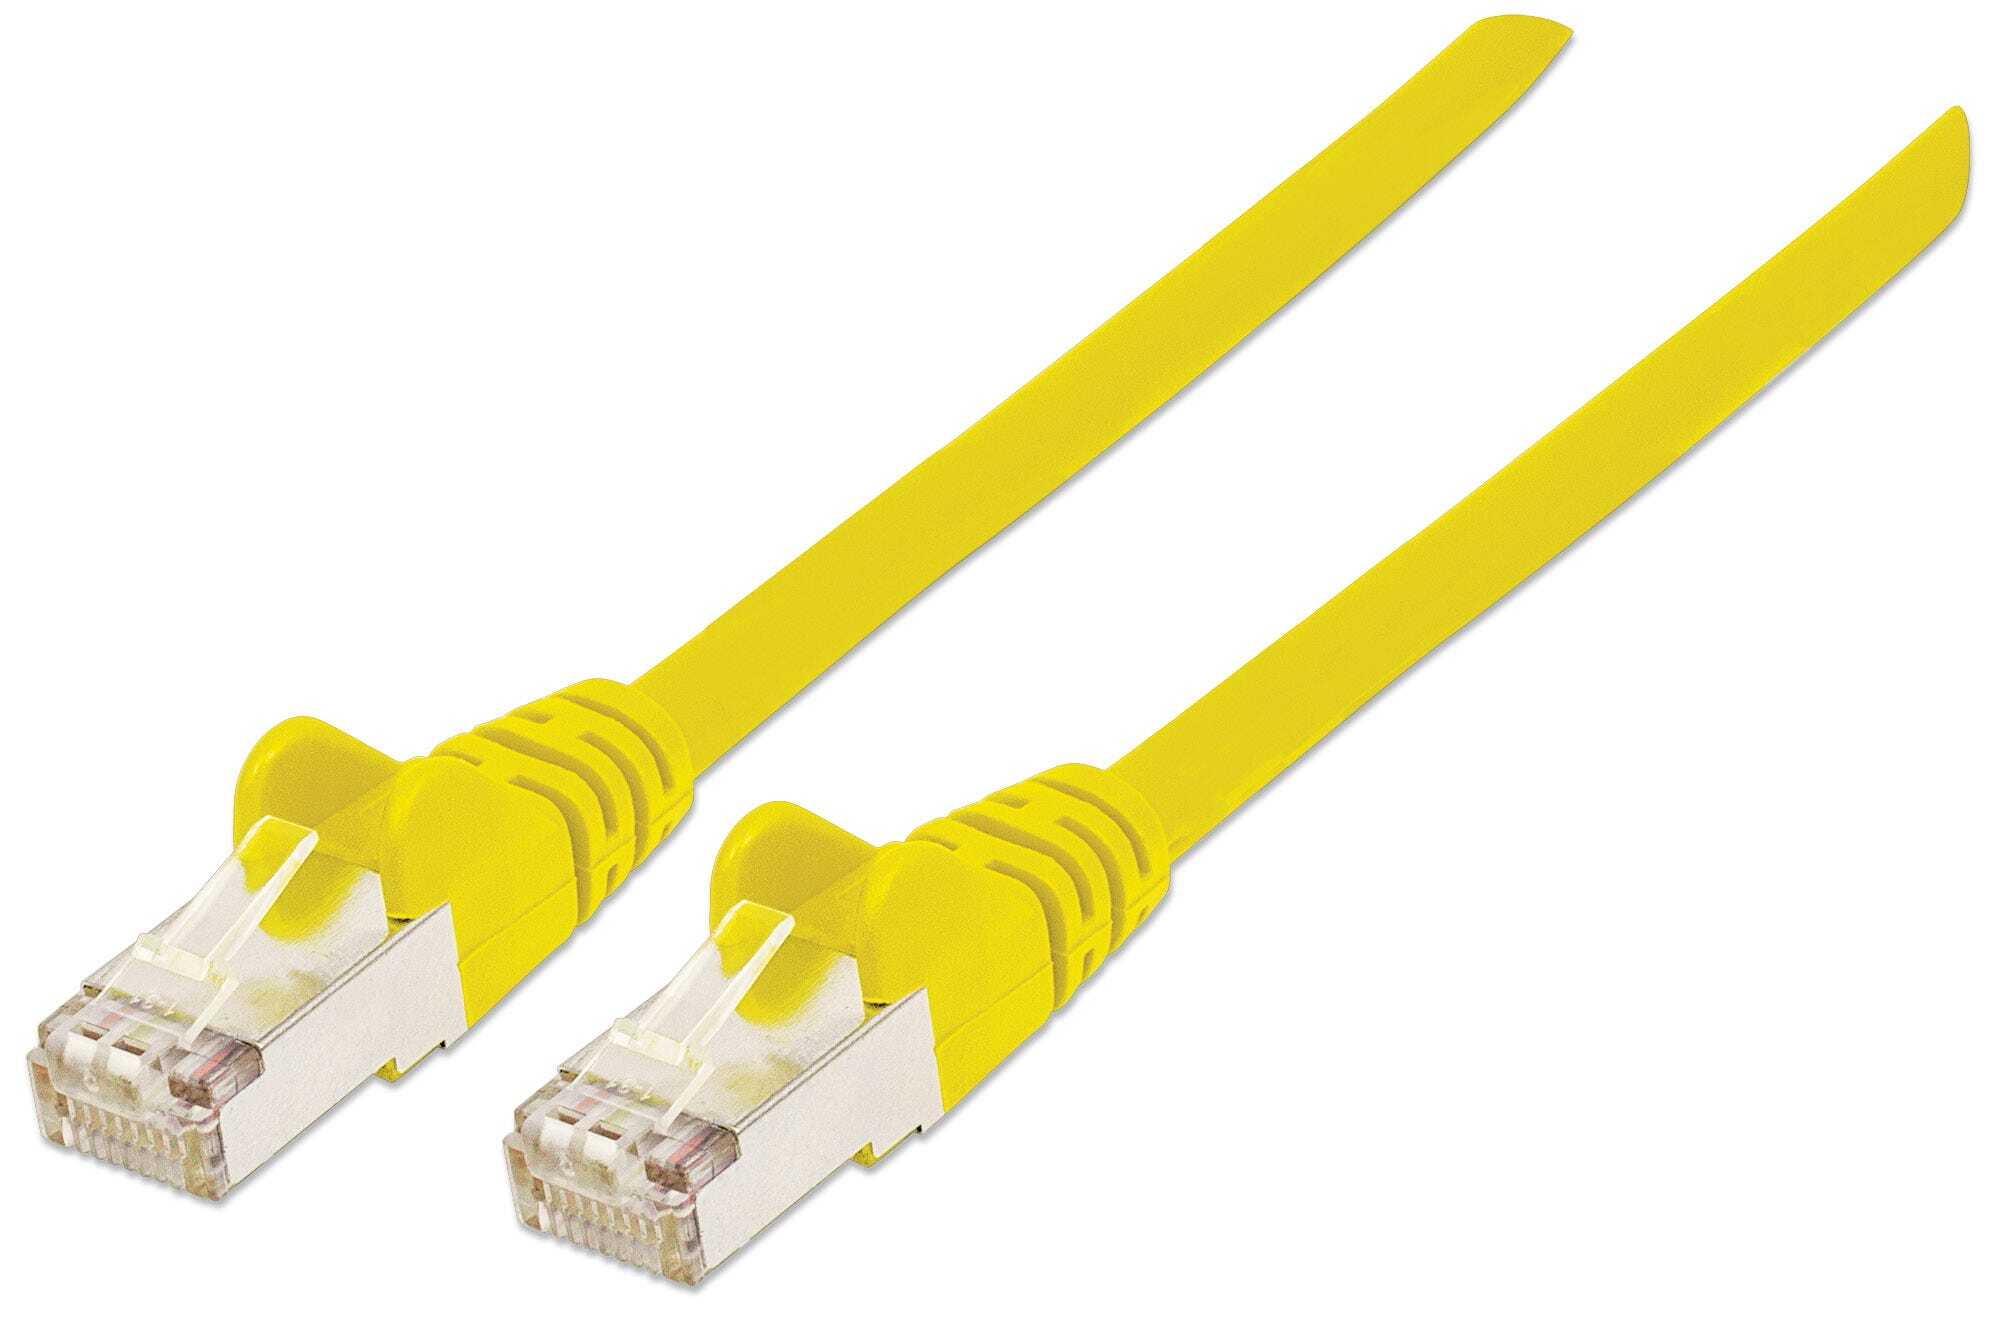 Intellinet Network Patch Cable, Cat7 Cable/Cat6A Plugs, 2m, Yellow, Copper, S/FTP, LSOH / LSZH, PVC, Gold Plated Contacts, Snagless, Booted, Polybag